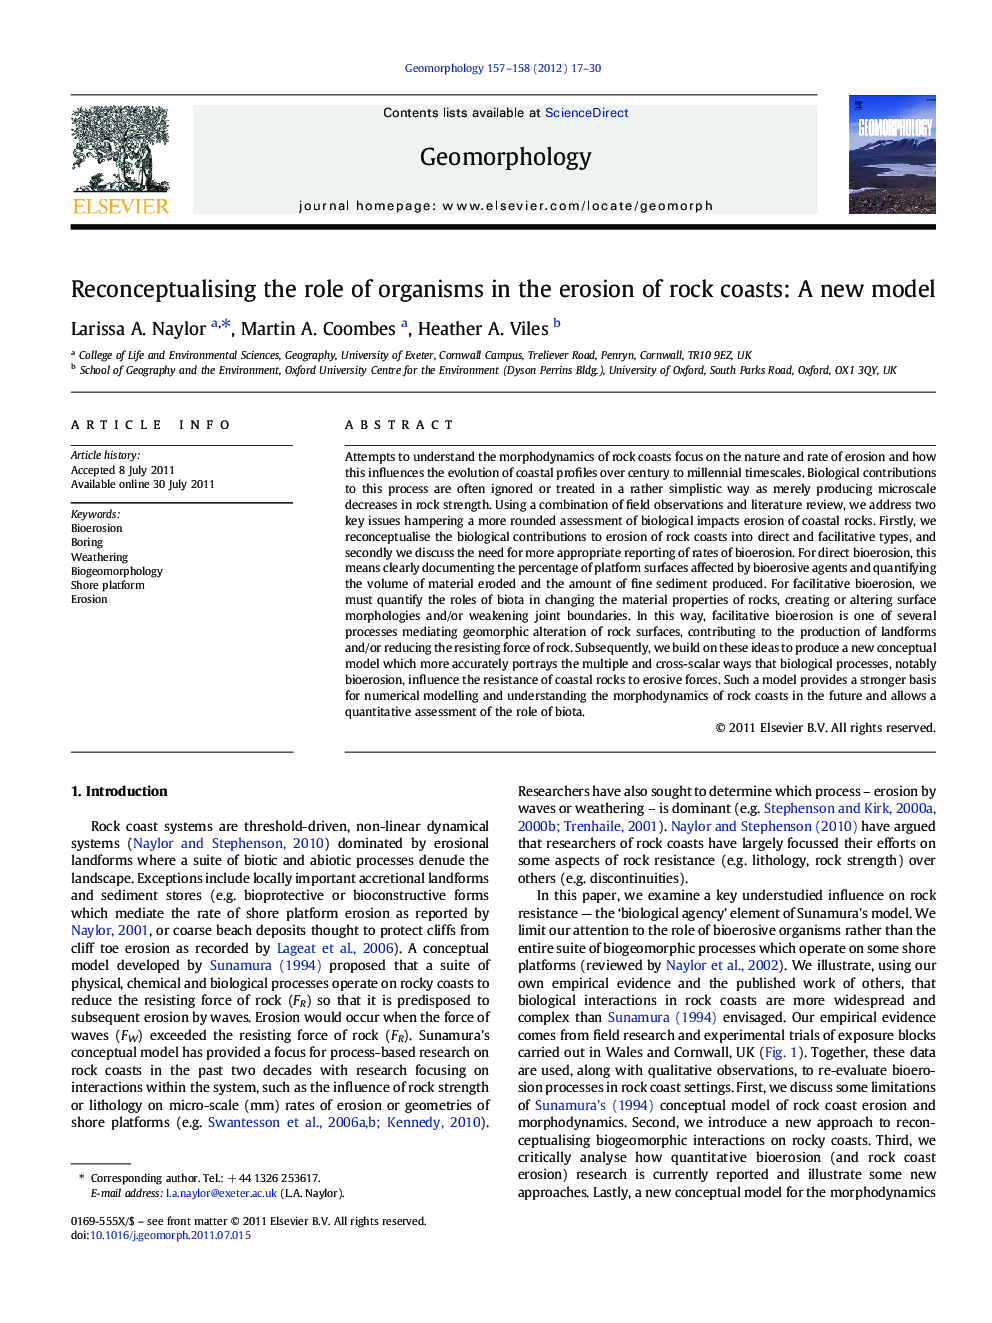 Reconceptualising the role of organisms in the erosion of rock coasts: A new model